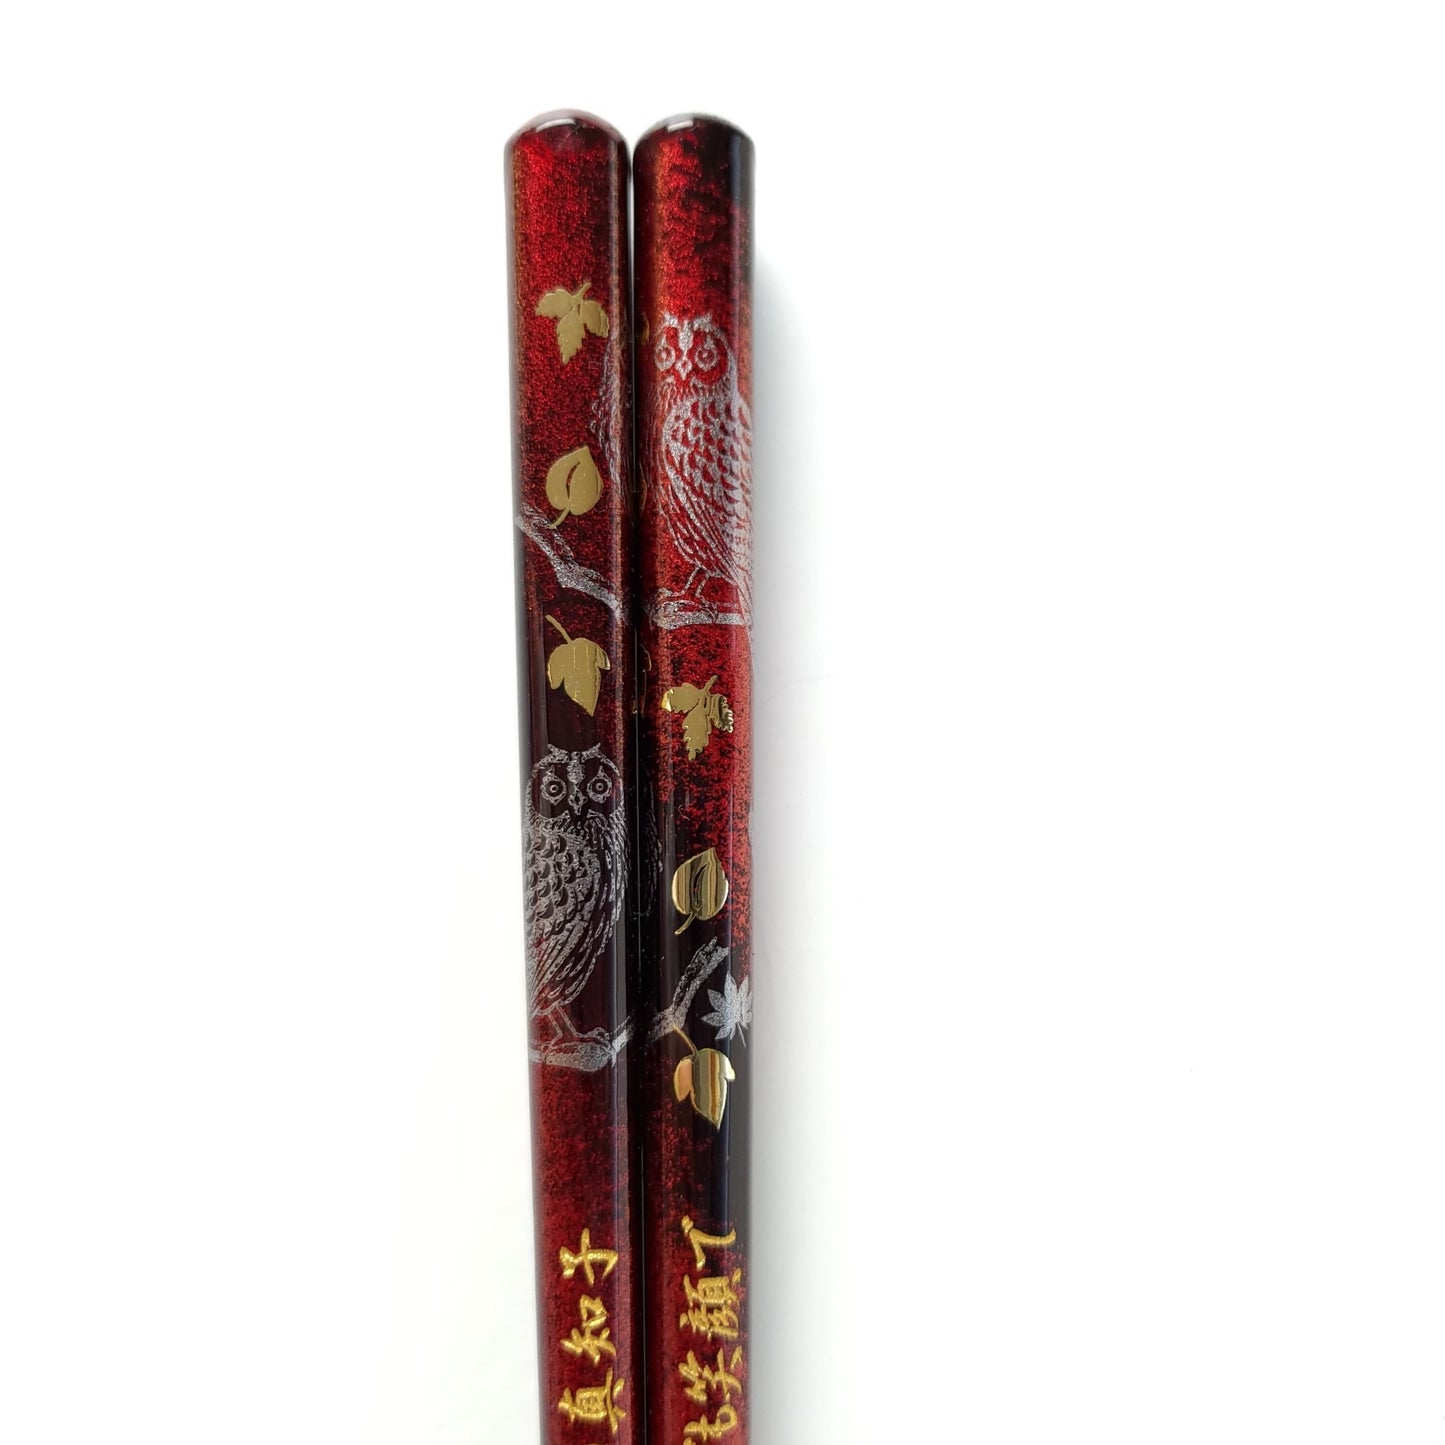 Luxury gold leaves and owls Japanese chopsticks green red - DOUBLE PAIR WITH ENGRAVED WOODEN BOX SET